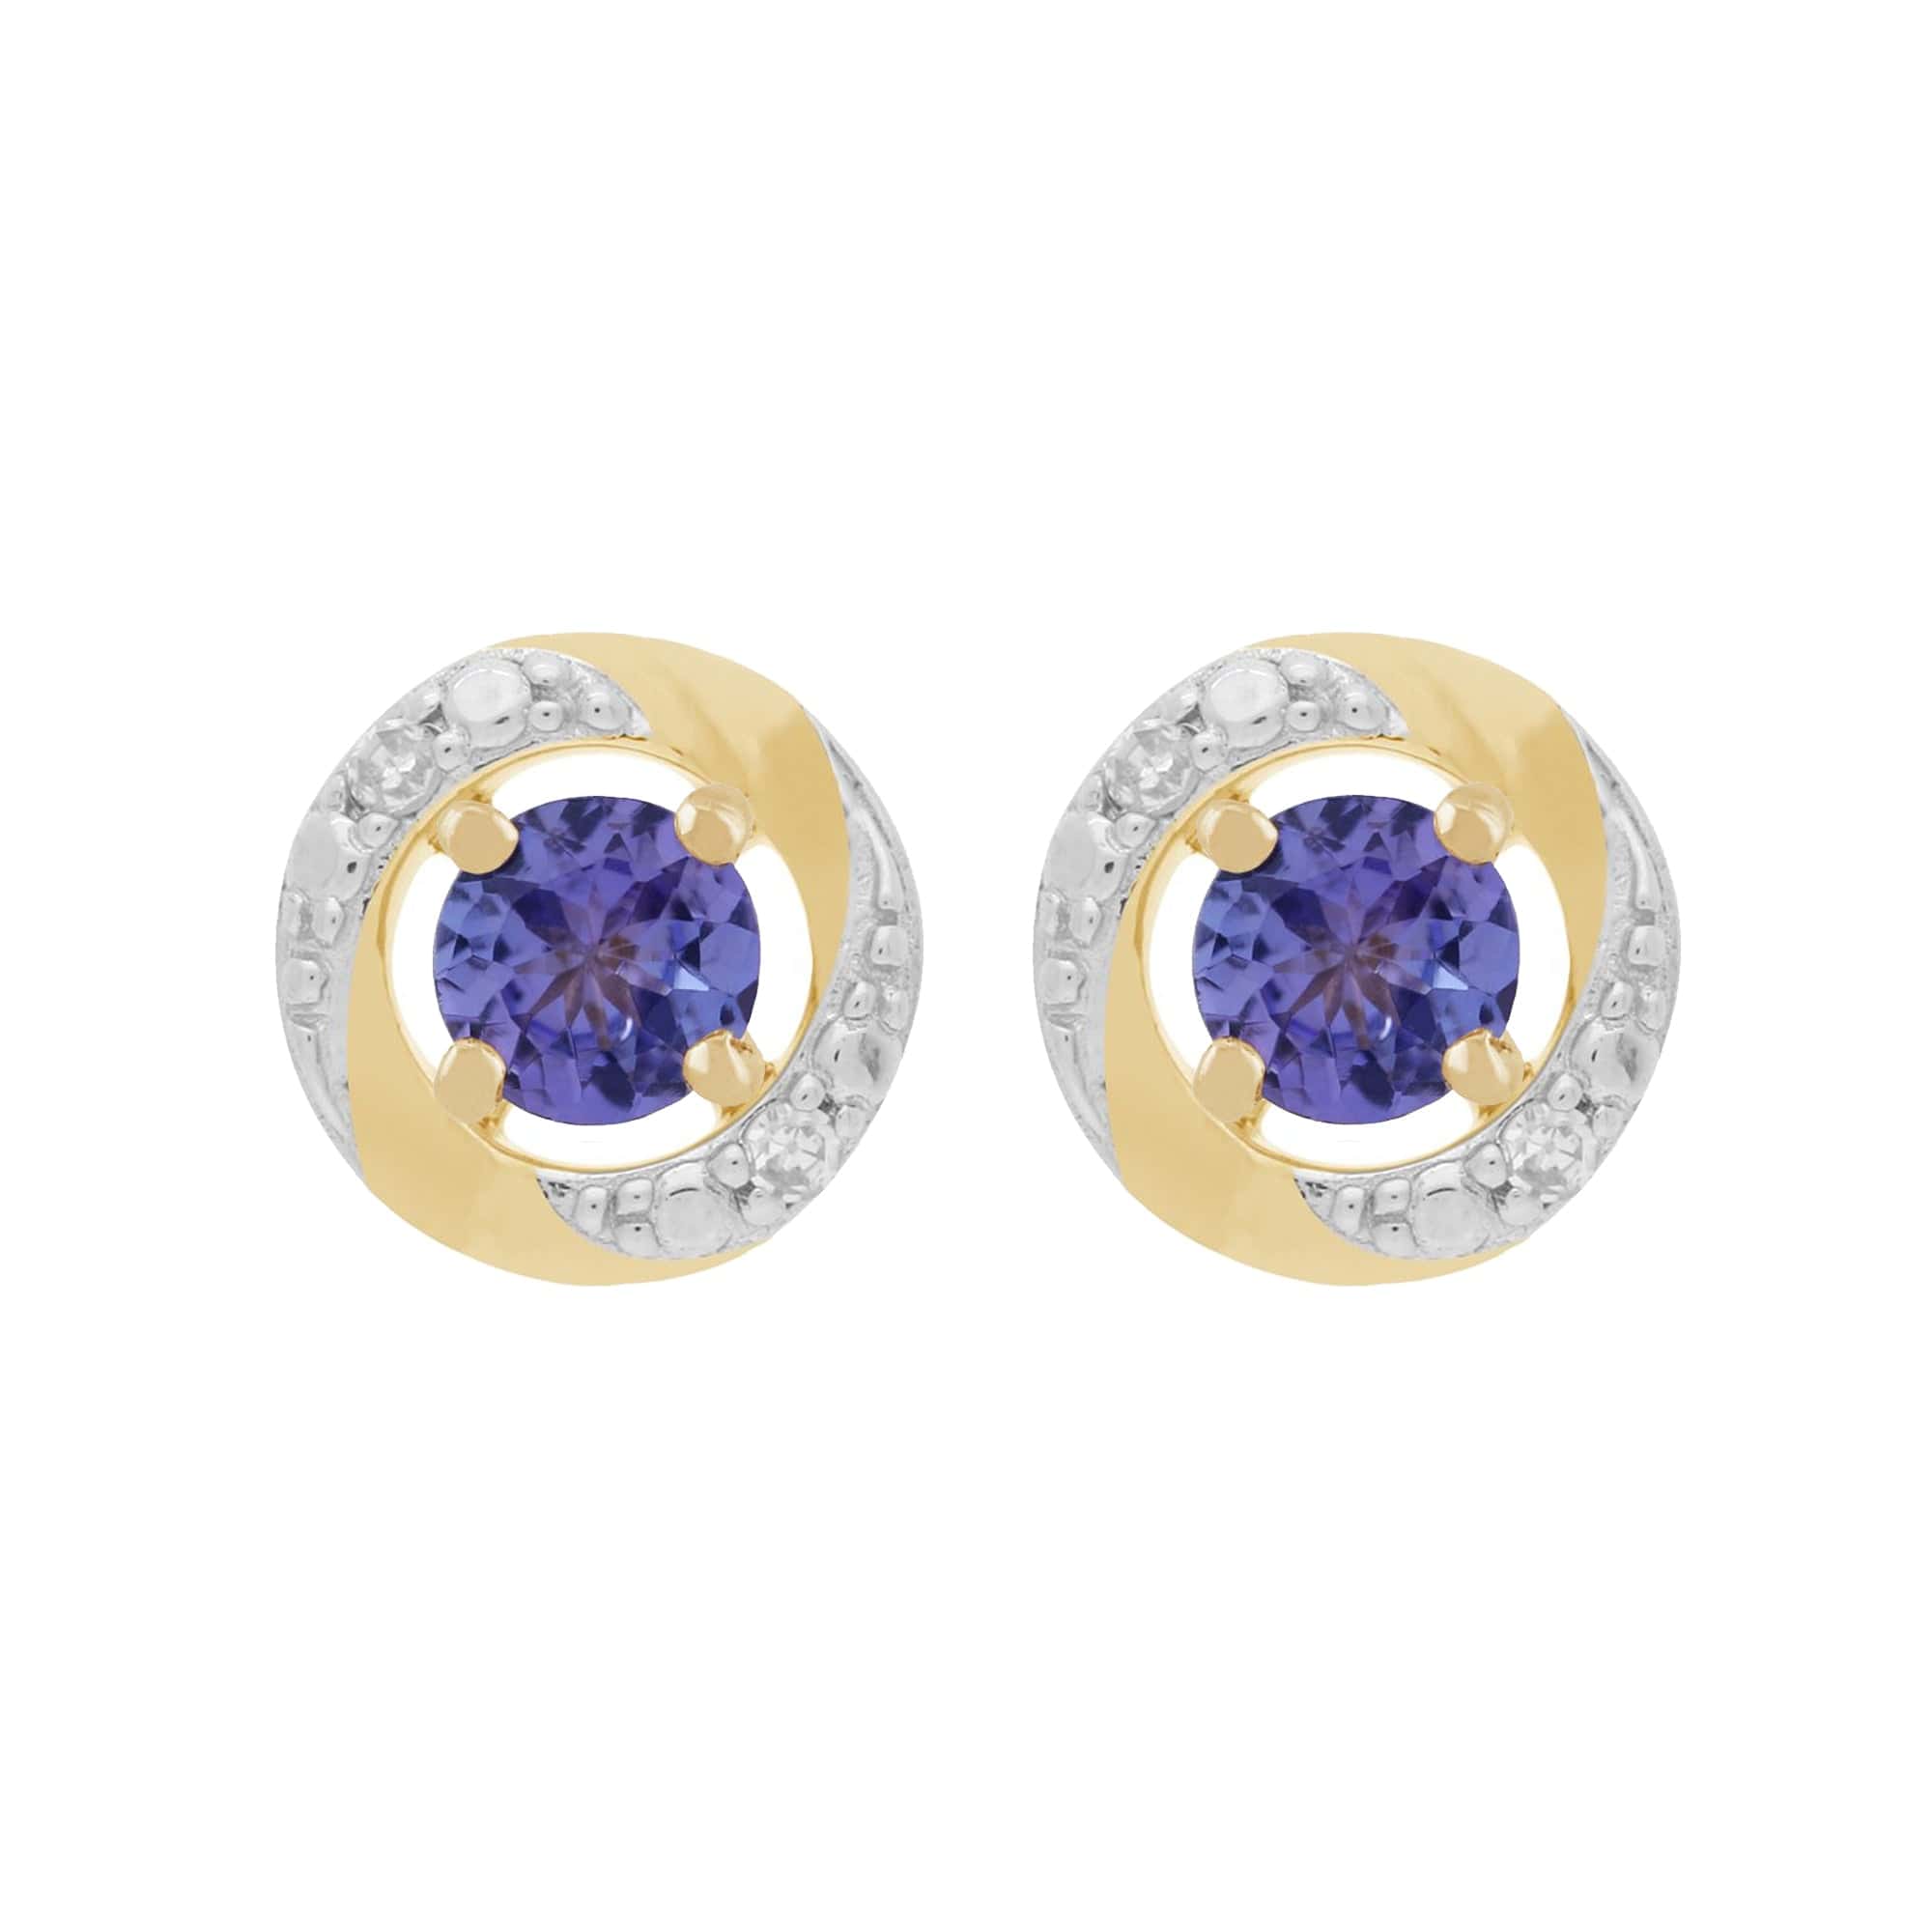 11557-191E0374019 Classic Round Tanzanite Stud Earrings with Detachable Diamond Halo Ear Jacket in 9ct Yellow Gold 1